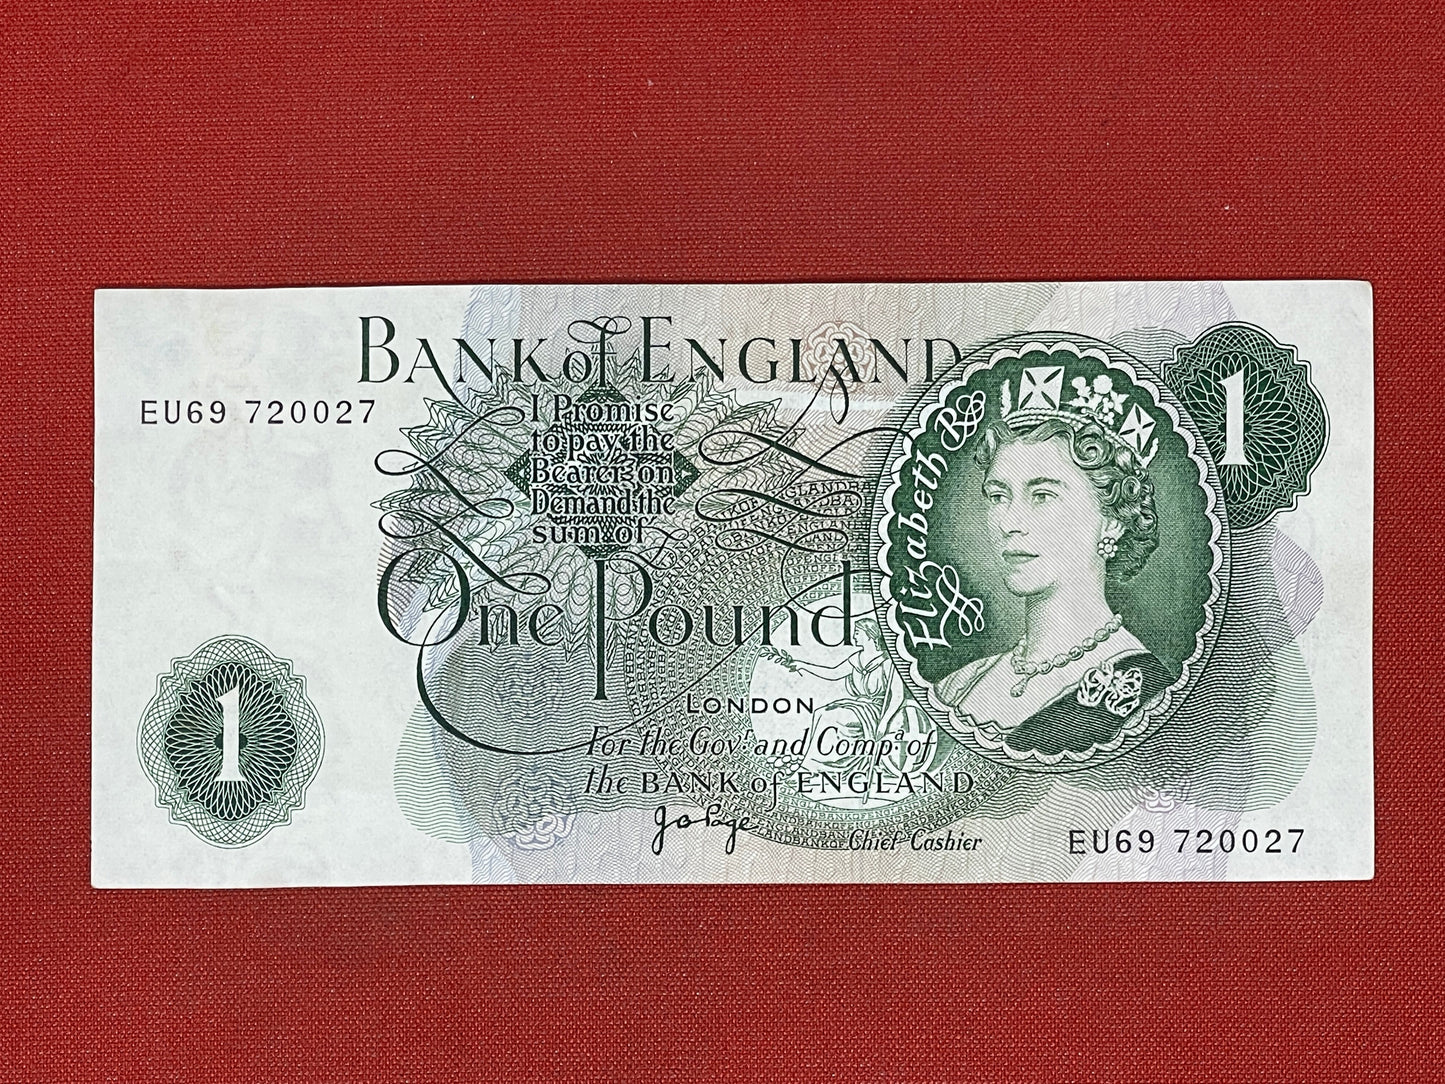 Bank of England £1 Banknote Signed J Page 1970 - 1980 ( Dugg B322 ))